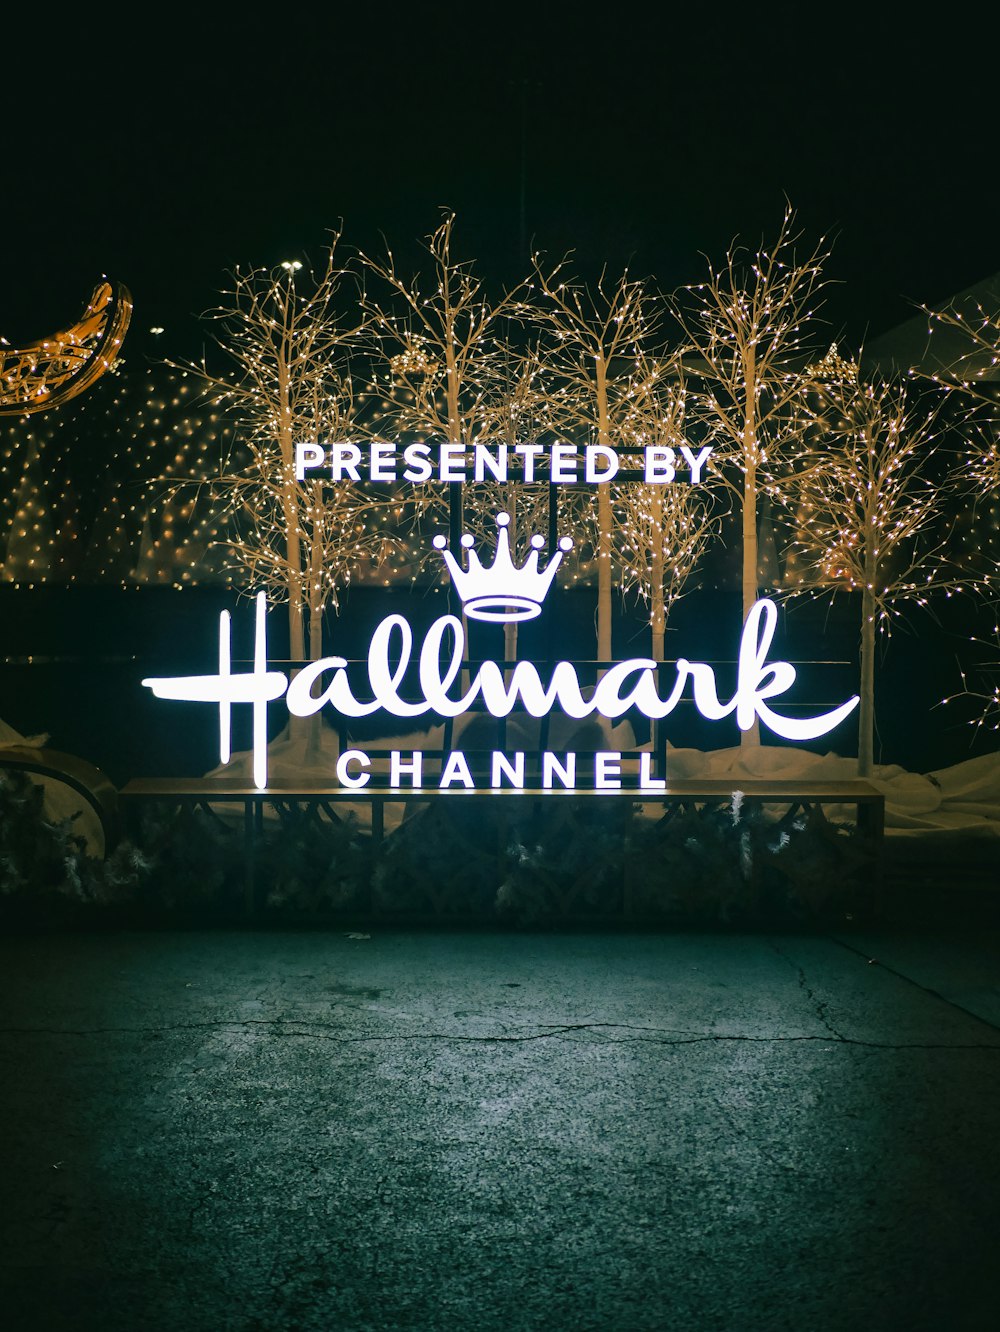 a lighted sign that reads, presented by halemark channel